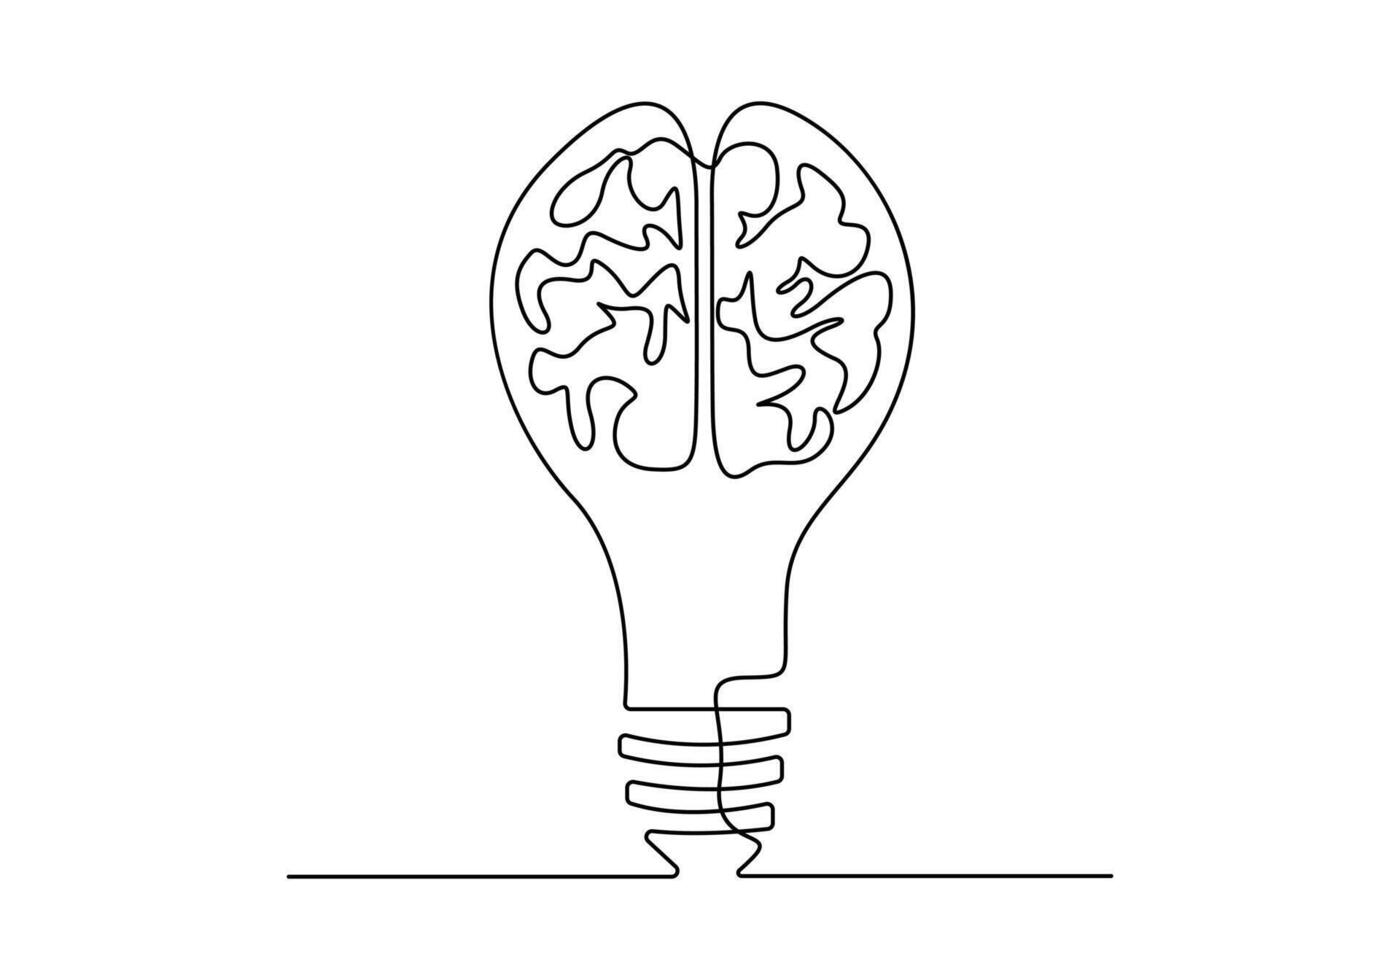 Single line drawing of lightbulb with human brain for medical company logo identity vector illustration